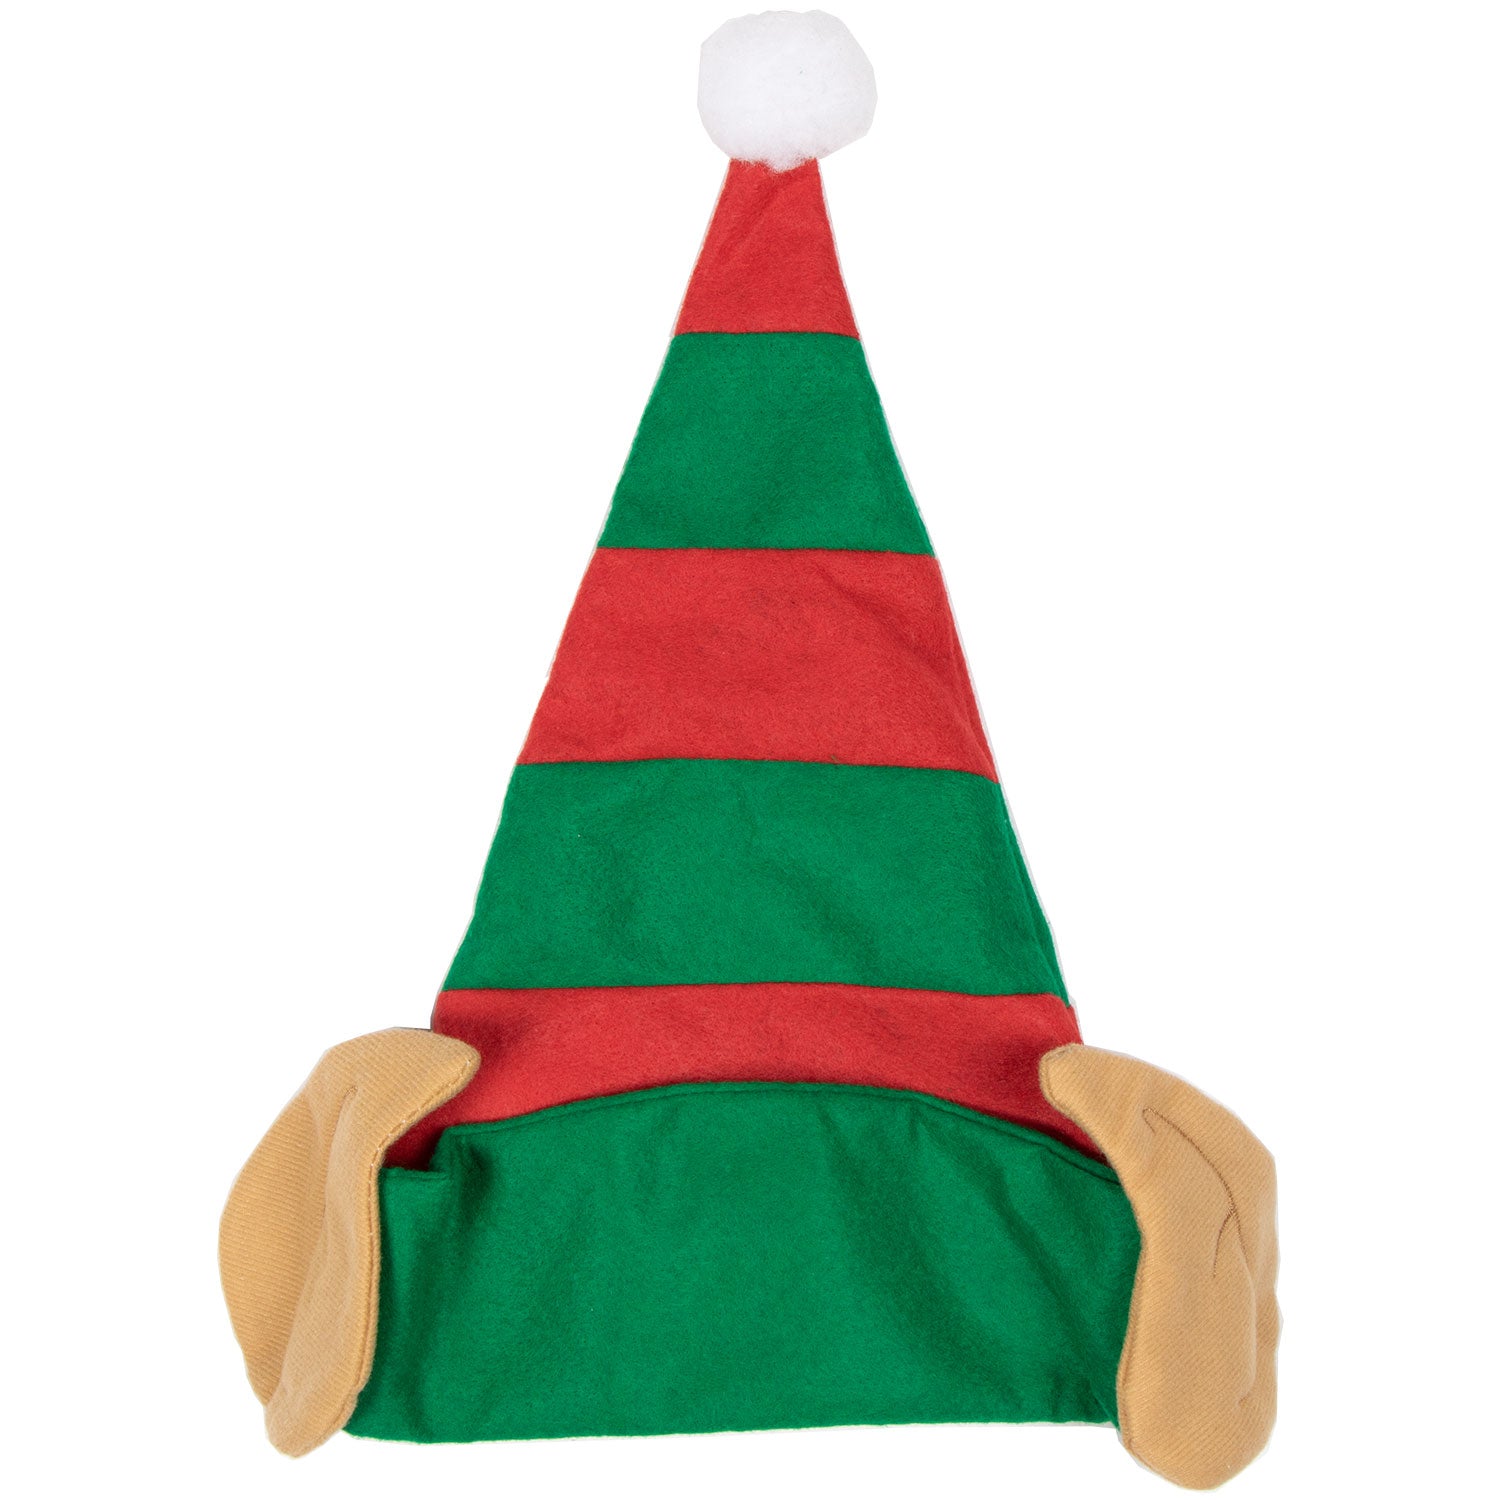 Child's Elf Hat with Ears